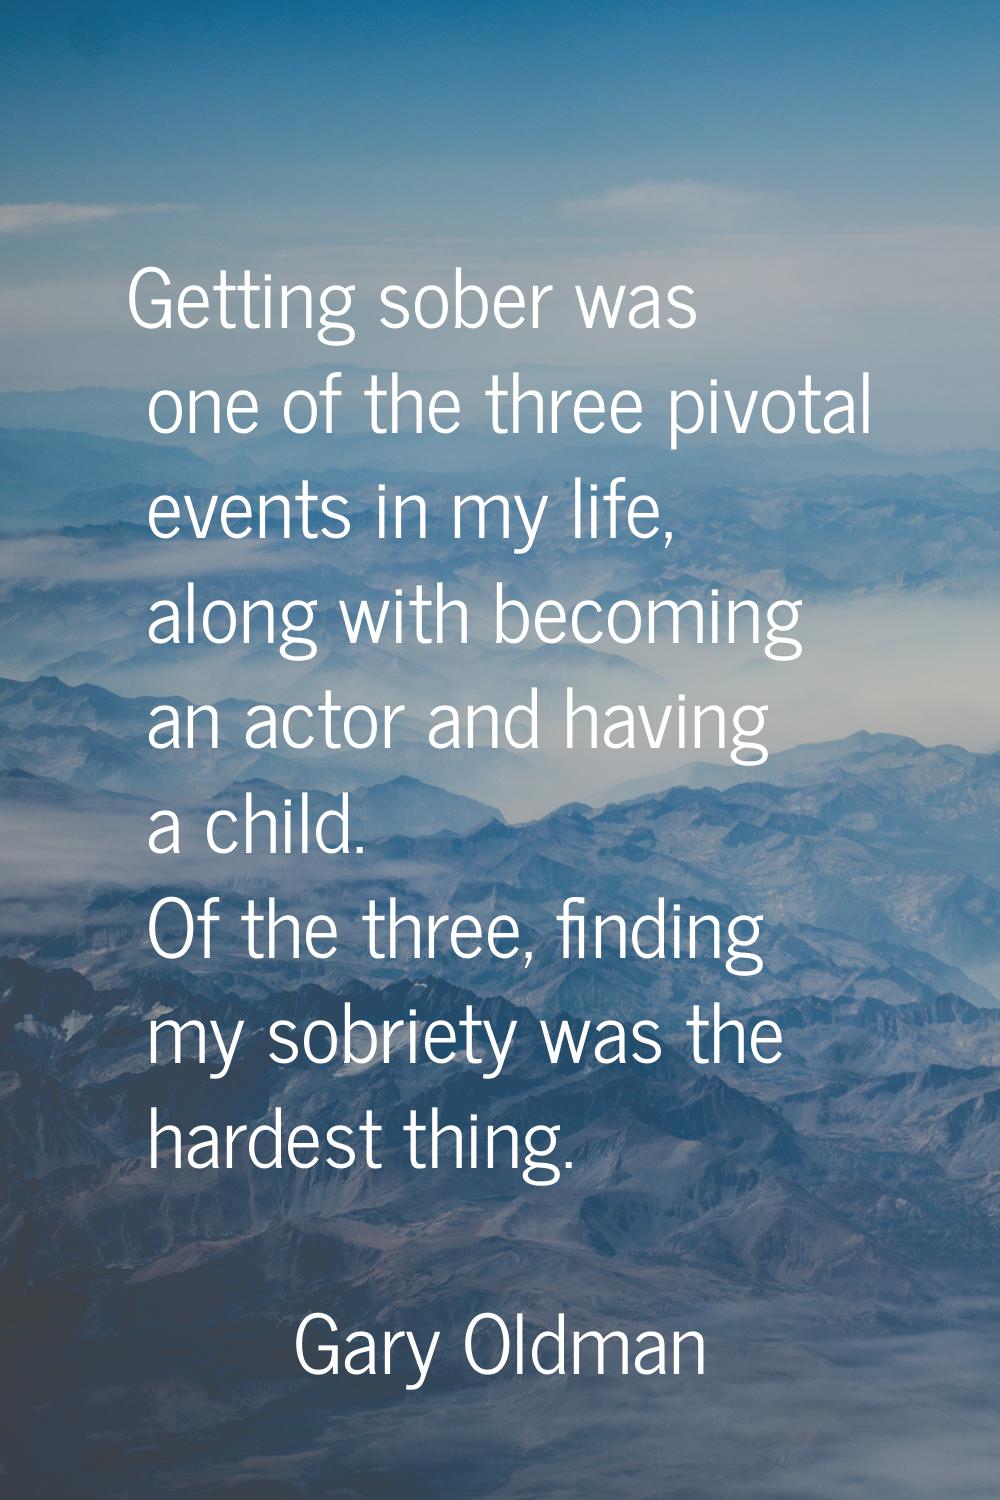 Getting sober was one of the three pivotal events in my life, along with becoming an actor and havi